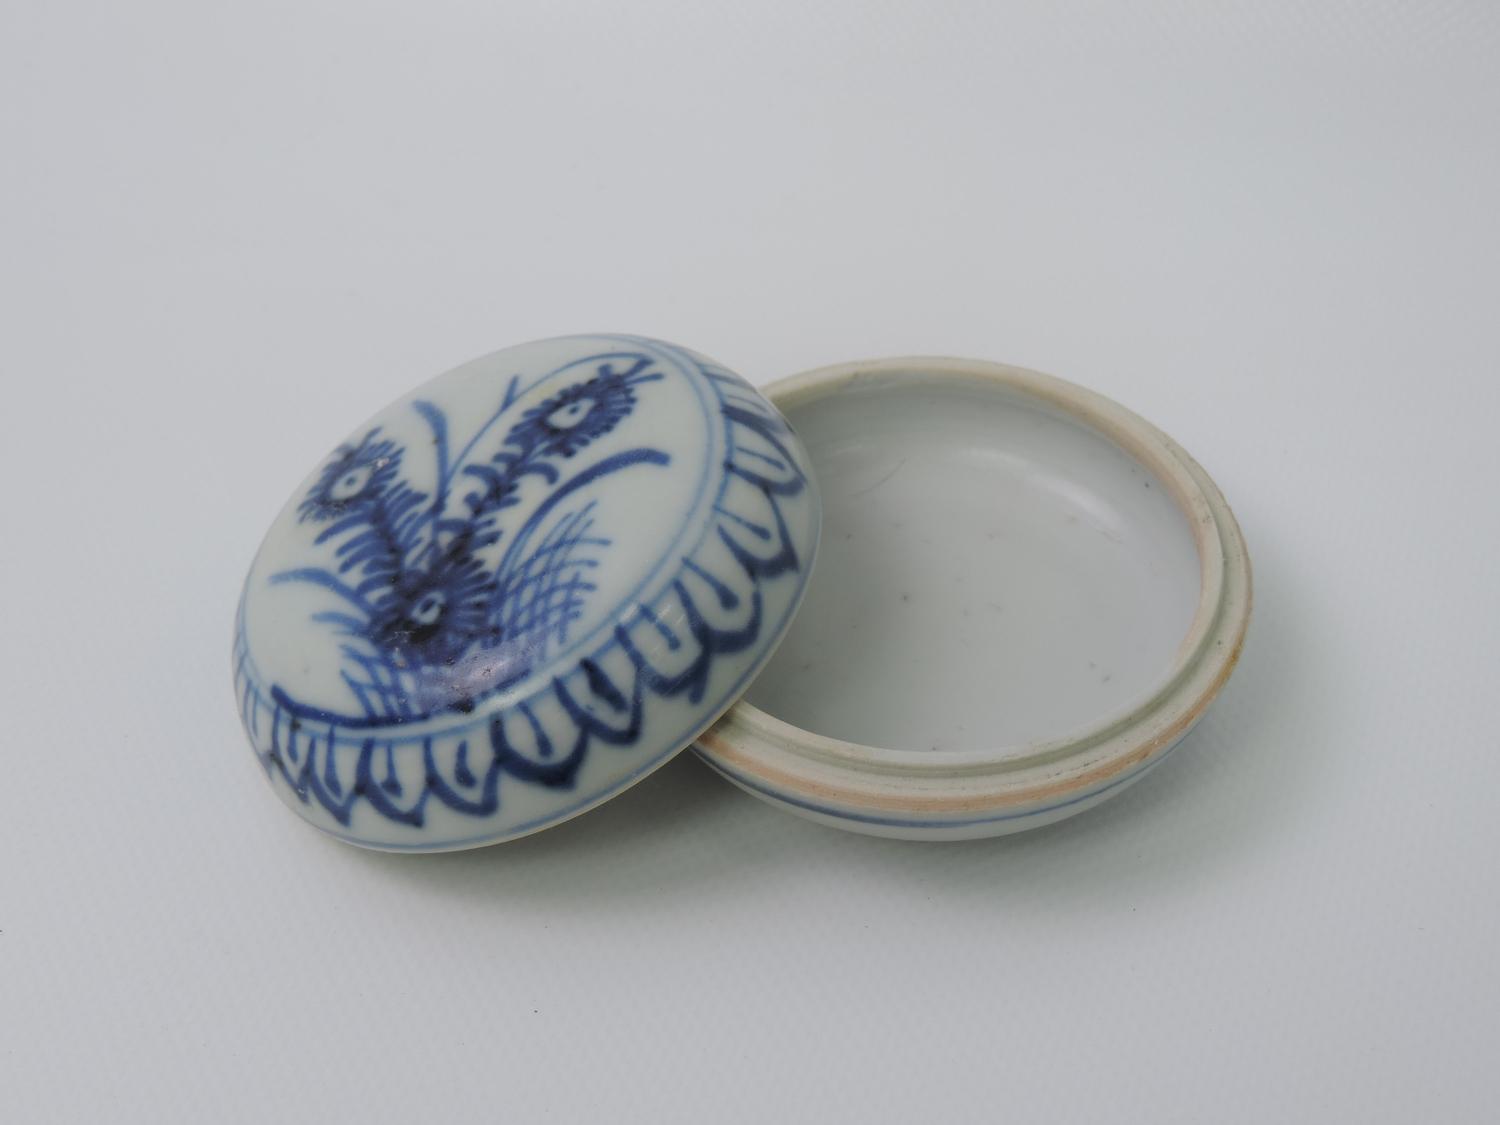 Blue and White Cau Mau Sealing Wax Pot 1725 - Sotheby's Authentication Number 32627 - Image 2 of 4